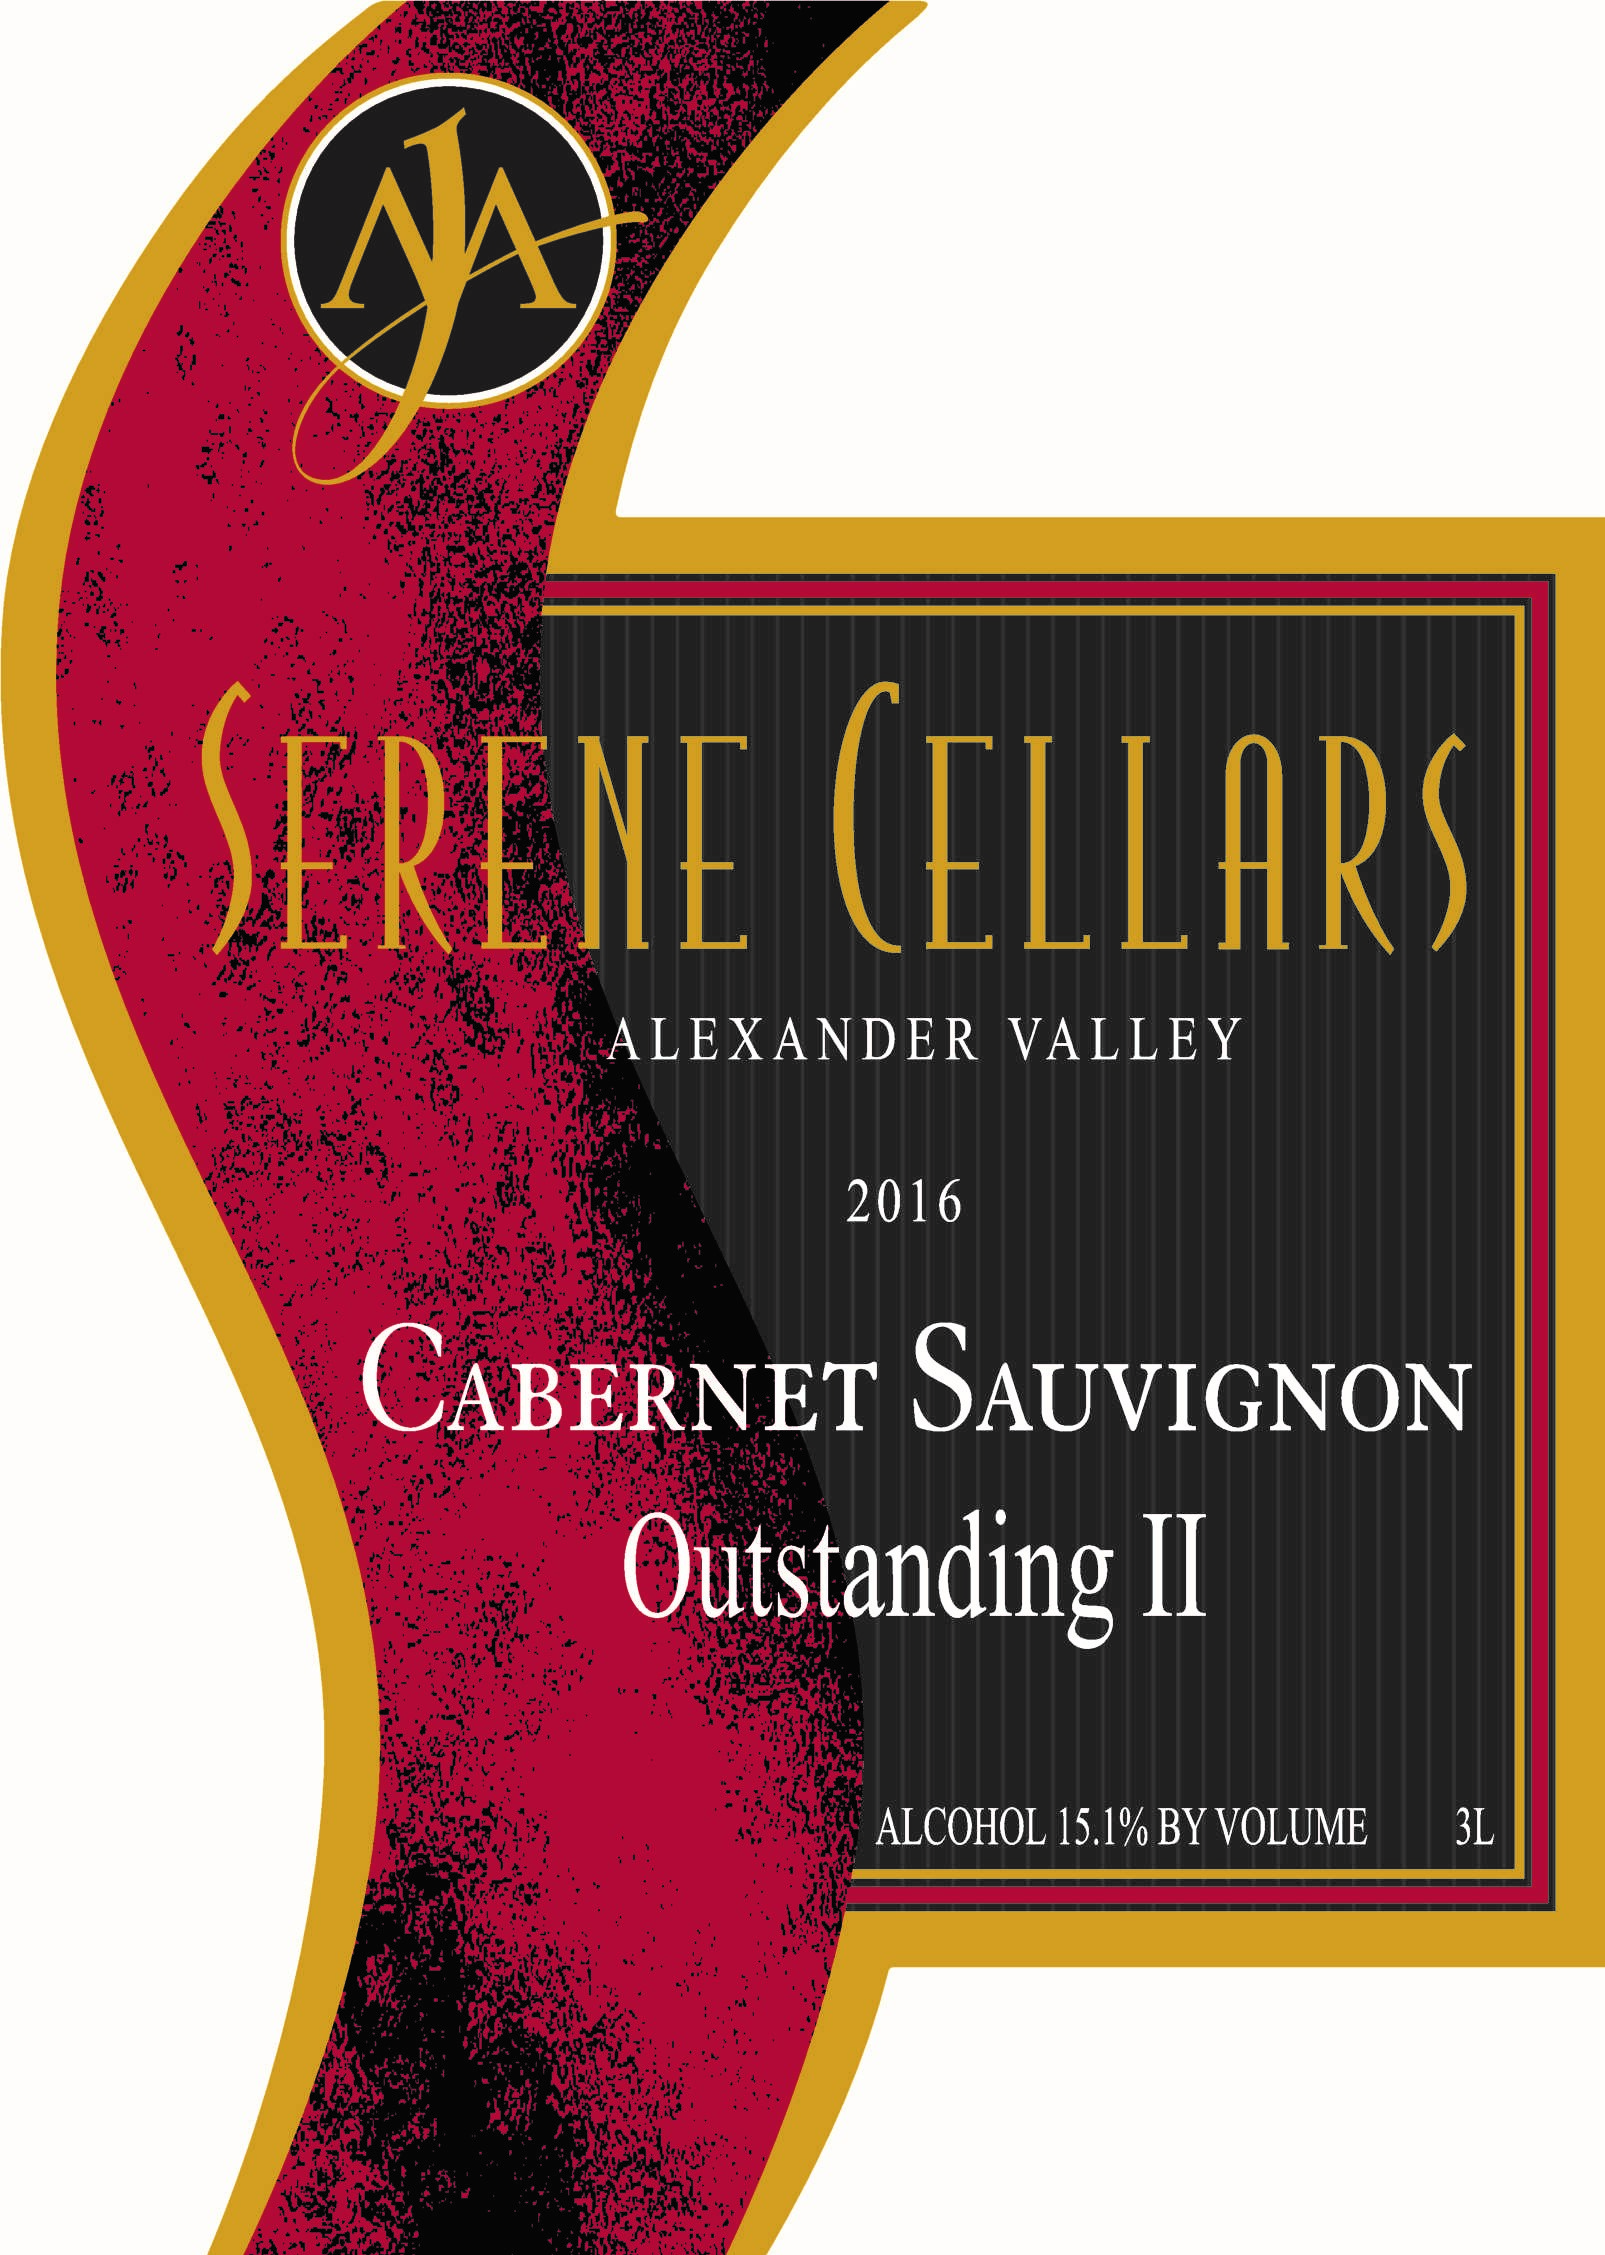 Product Image for 2016 Alexander Valley Cabernet Sauvignon "Outstanding II" 3L